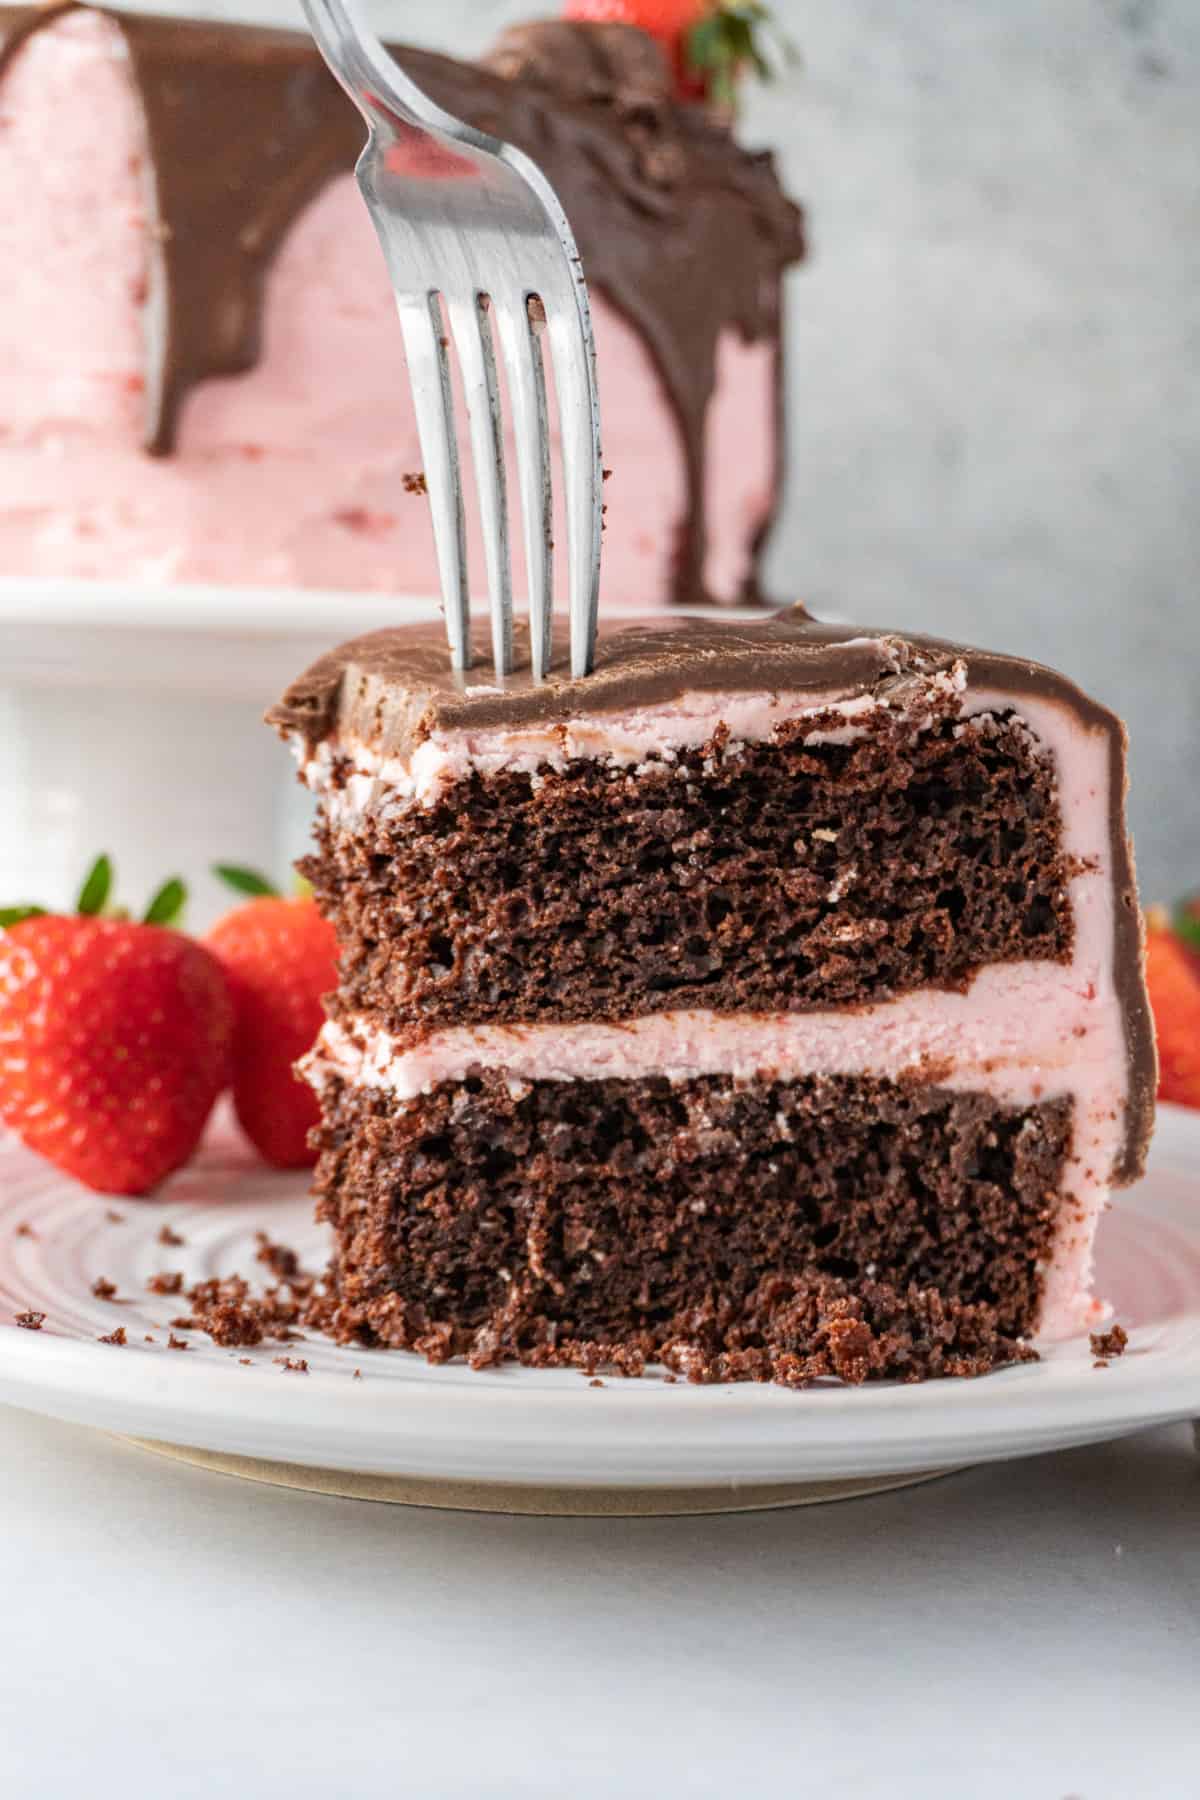 sticking a fork into a slice of cake